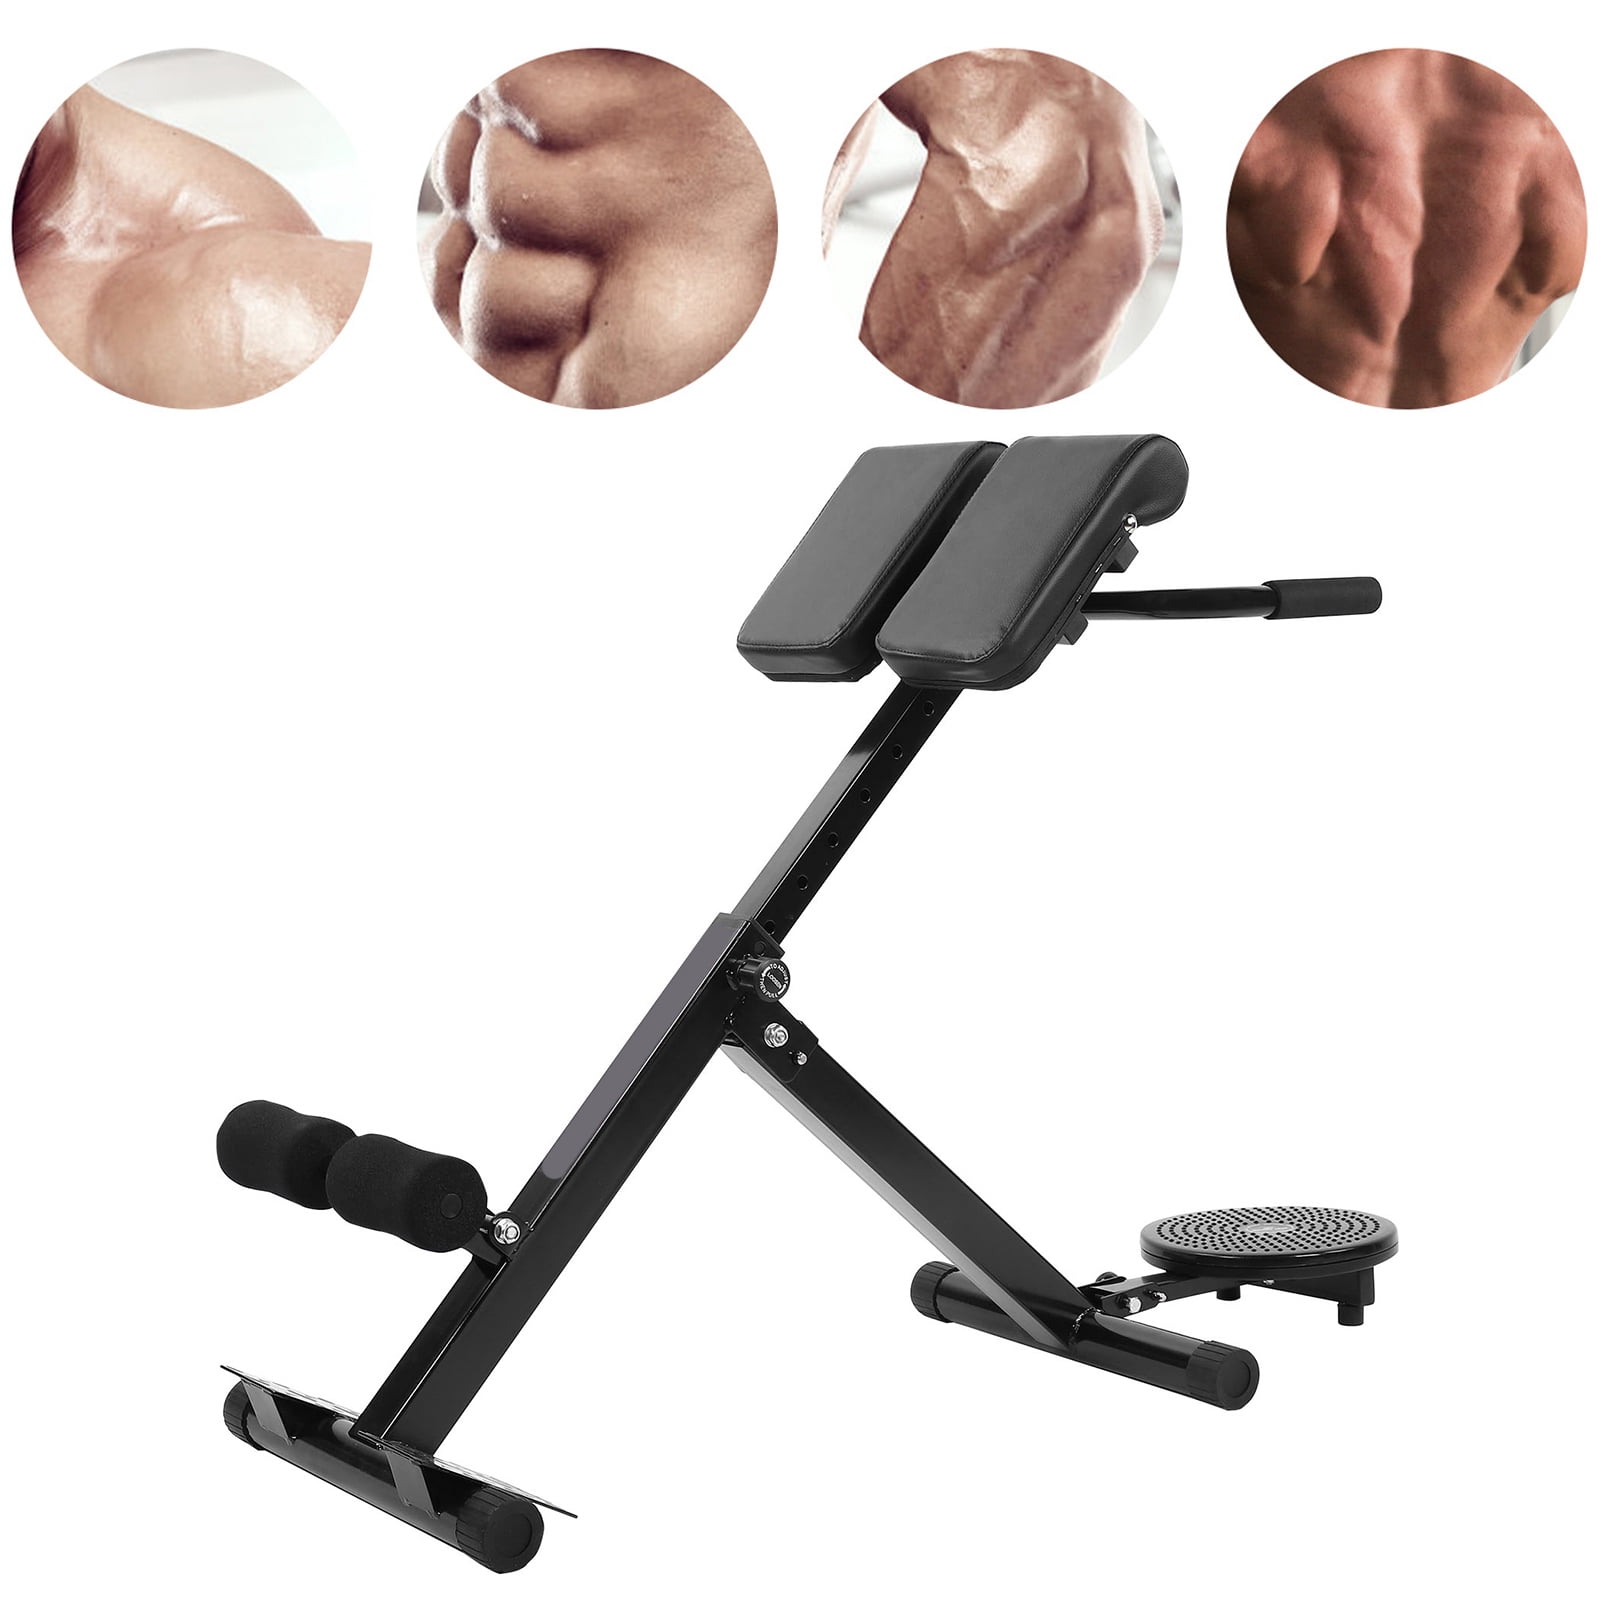 4-In-1 Adjustable Back Hyper Extension Gym Exercise Bench Roman Chair Foldable 